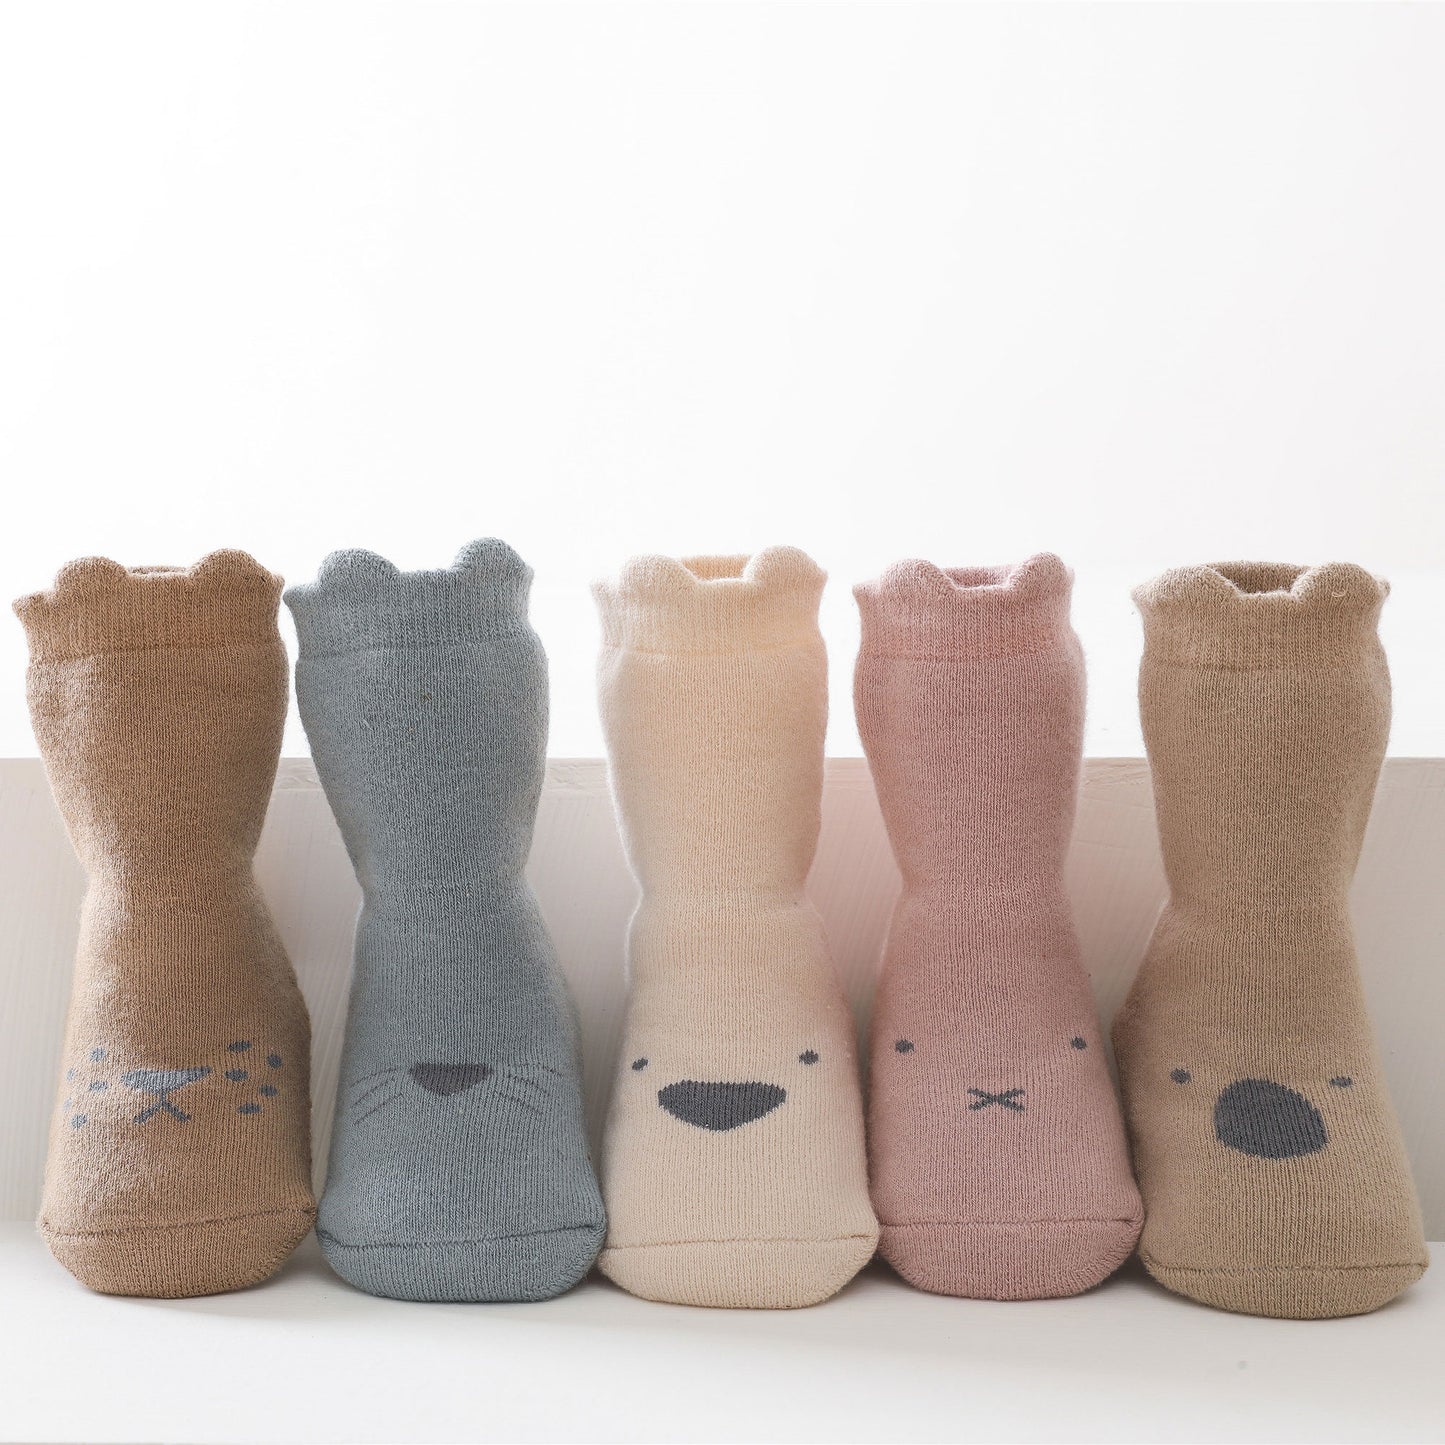 Into The Wild - Extra Warm - 4 Pairs of Stay-On Baby & Toddler Non-Slip Socks